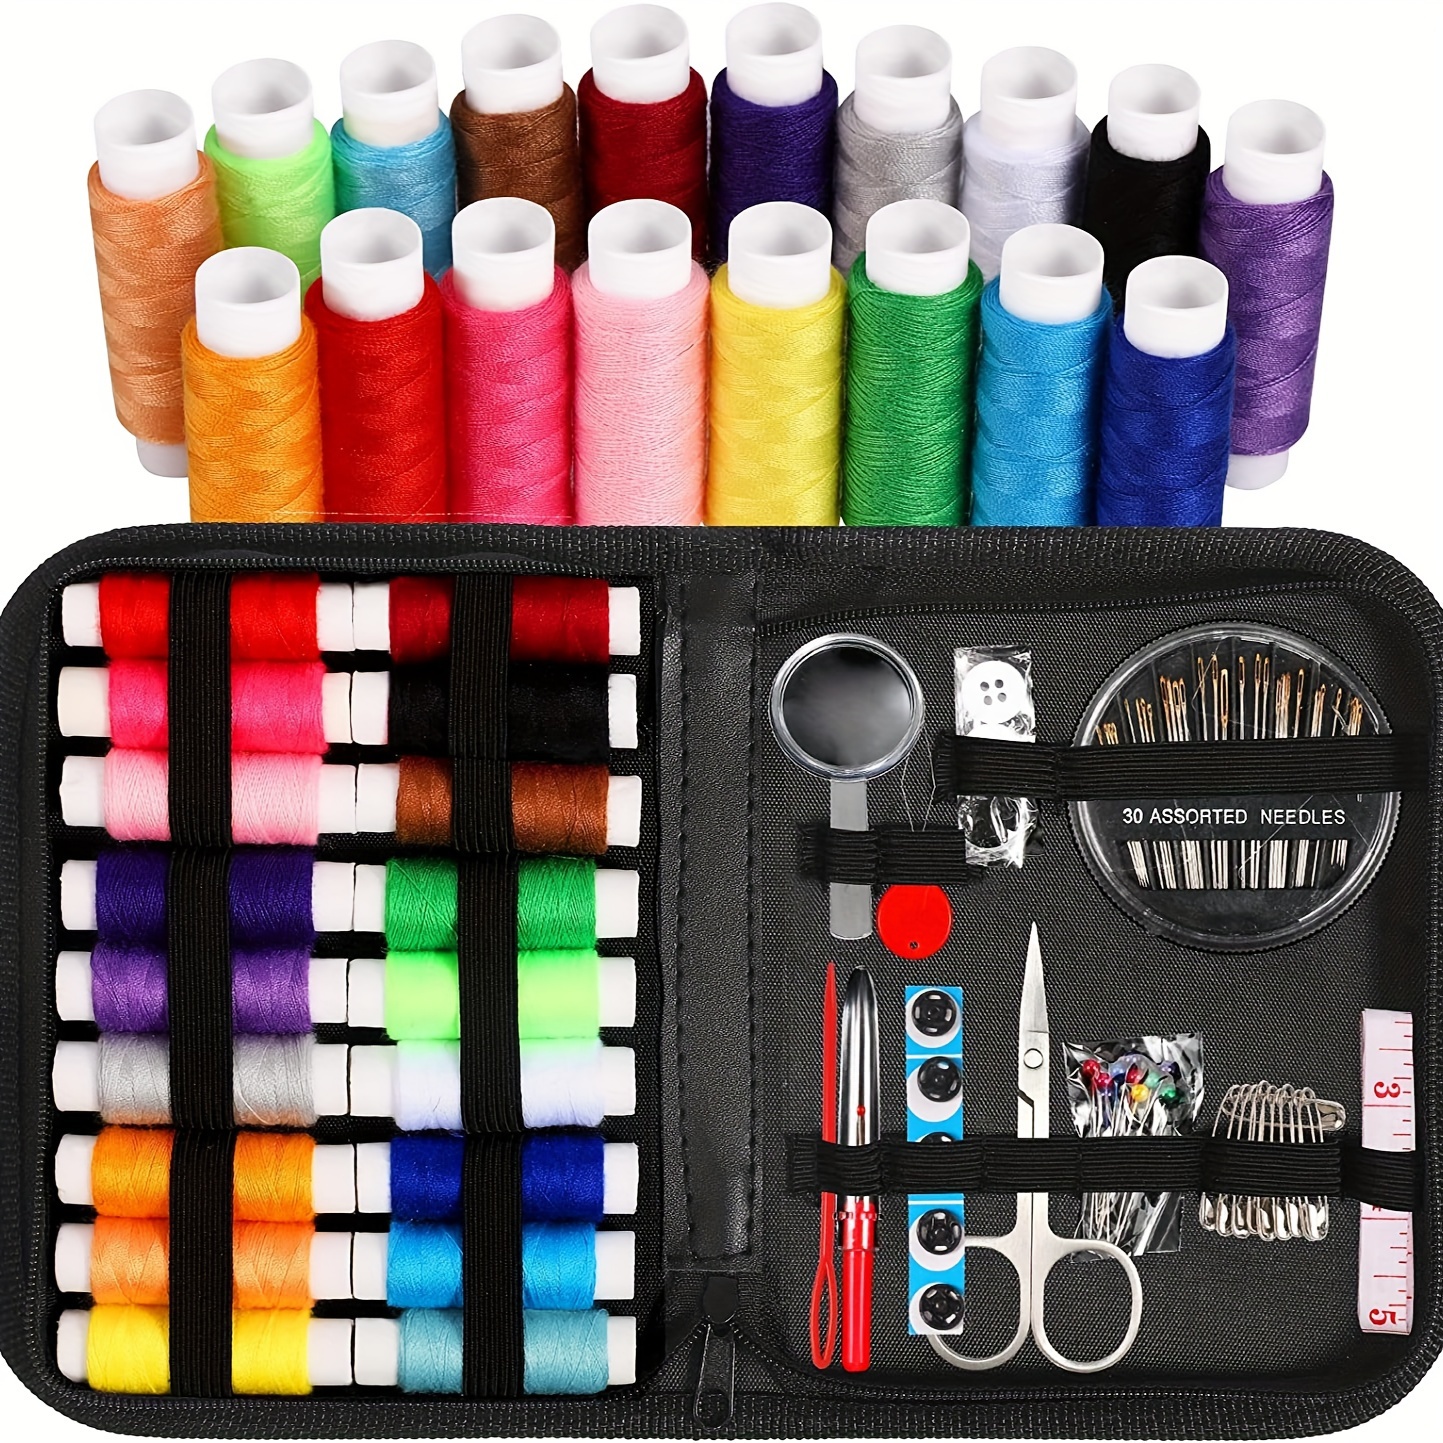 

86-piece Portable Sewing Kit With Assorted Tools & Accessories - Ideal For Clothing Repair, Diy Crafts & Travel